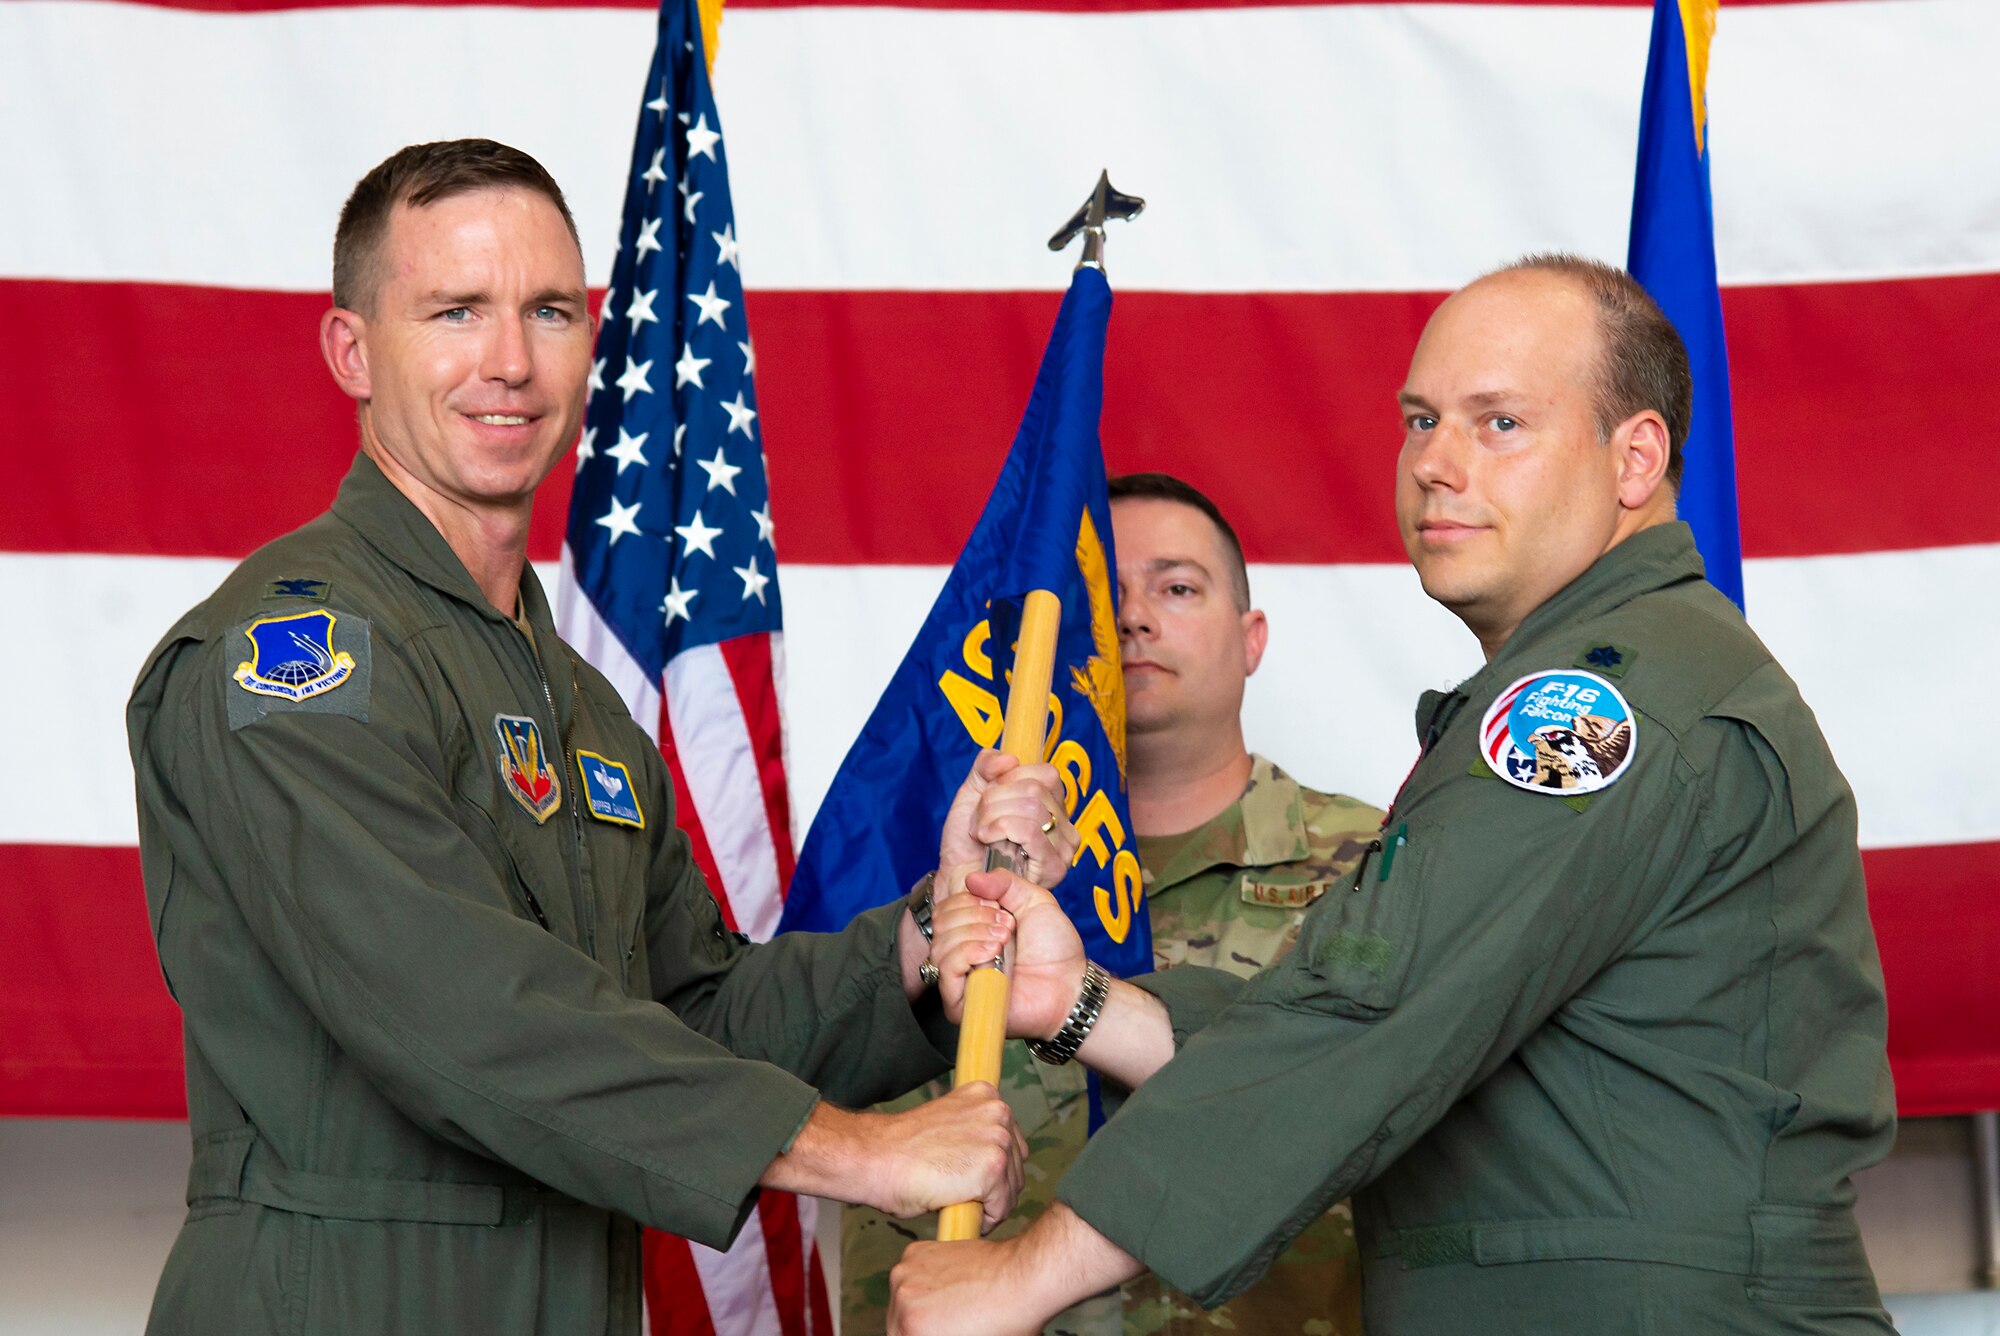 Col. John Galloway hands a guidon to Lt. Col. Daniel O'Neal, activating the 306th Fighter Squadron.